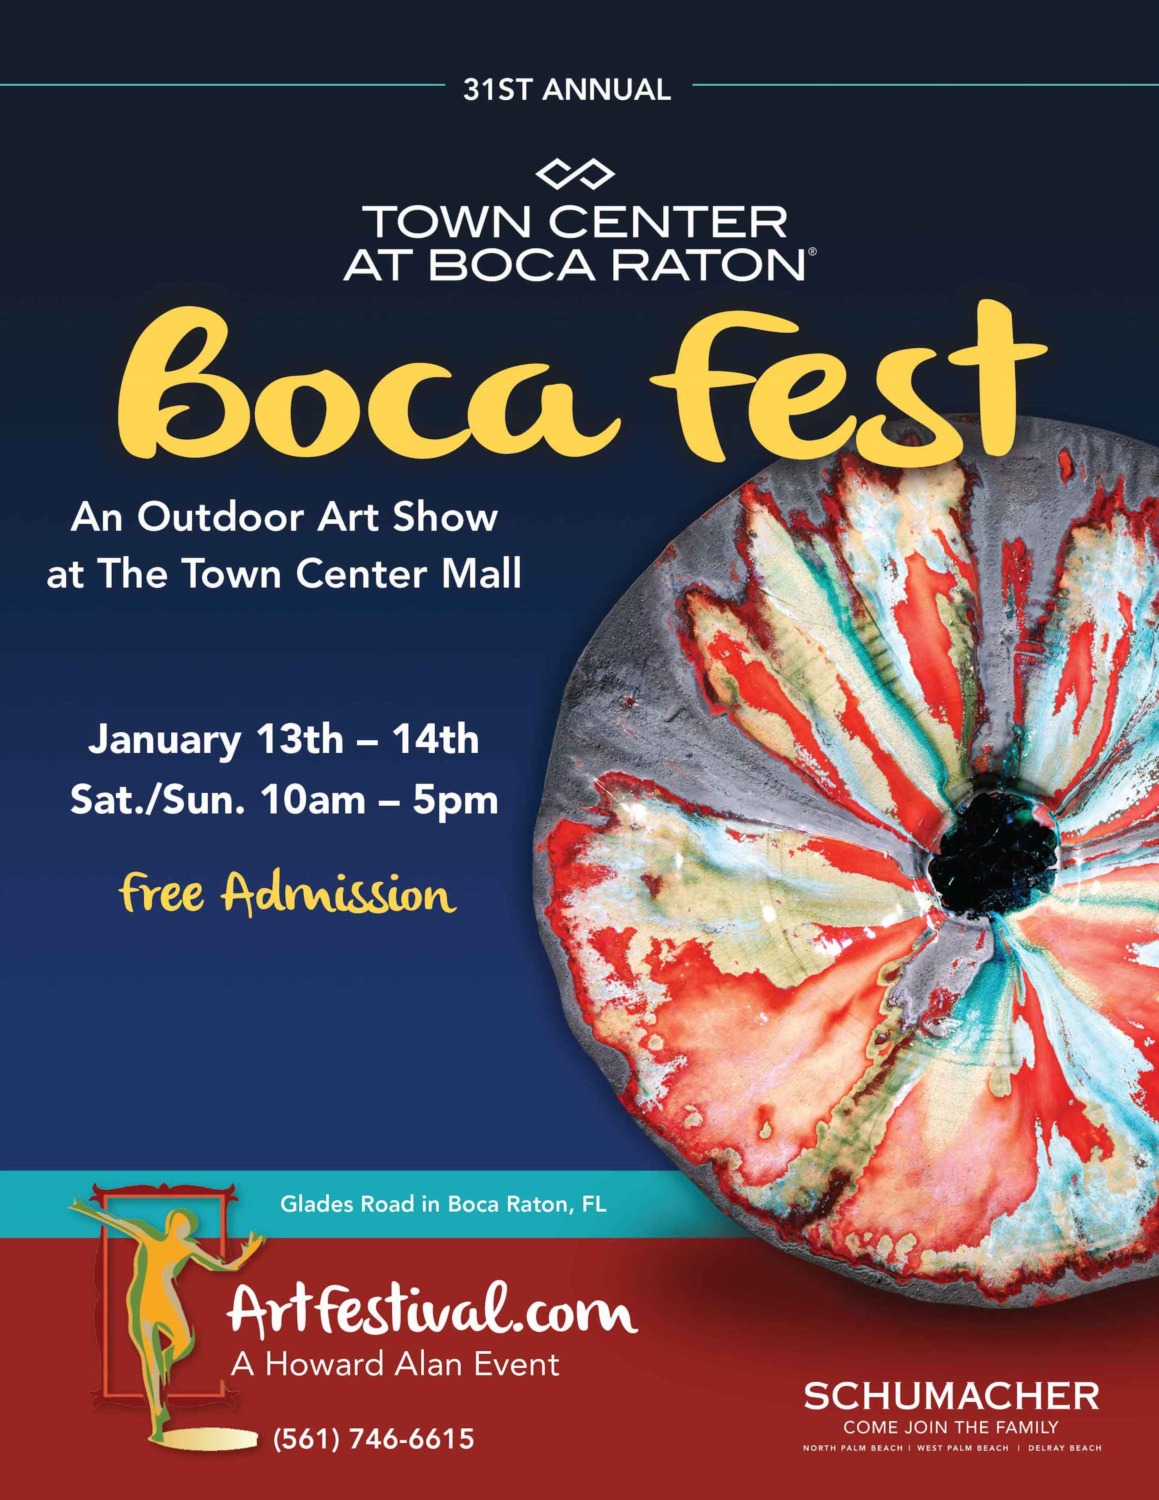 The 31st Annual Boca Fest at The Town Center Mall